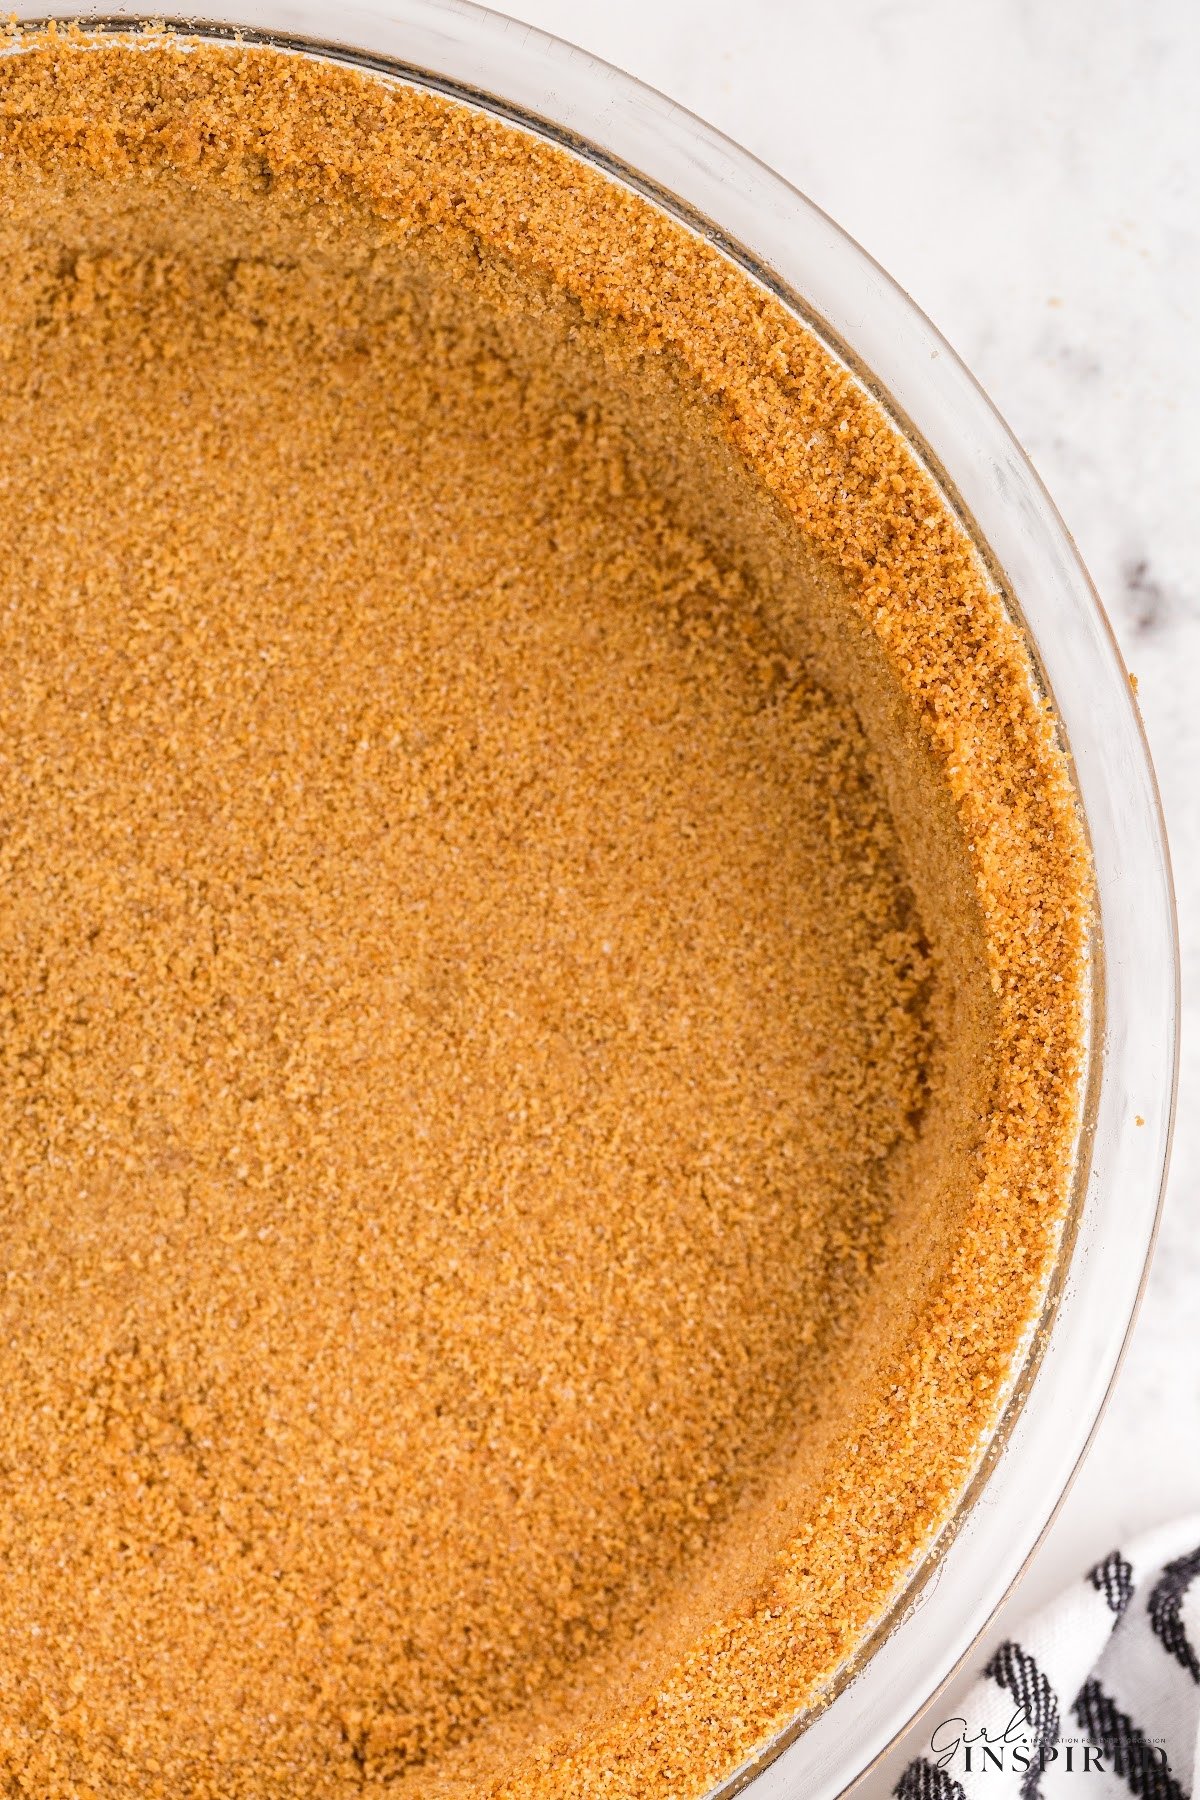 Top view of the graham cracker pie crust in a glass dish.